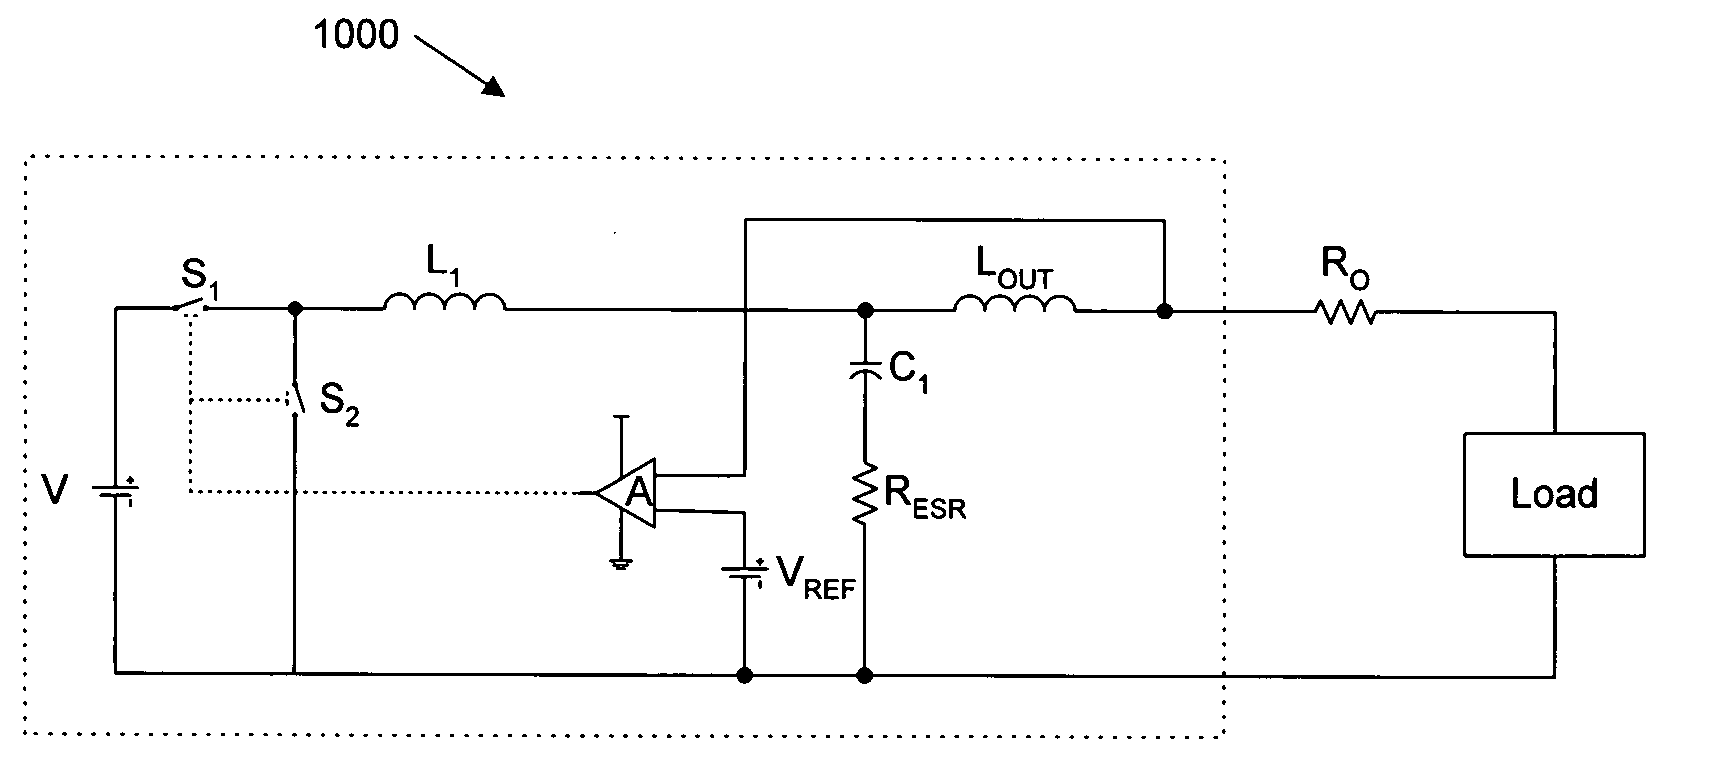 System and method for determining the desired decoupling components for a power distribution system having a voltage regulator module